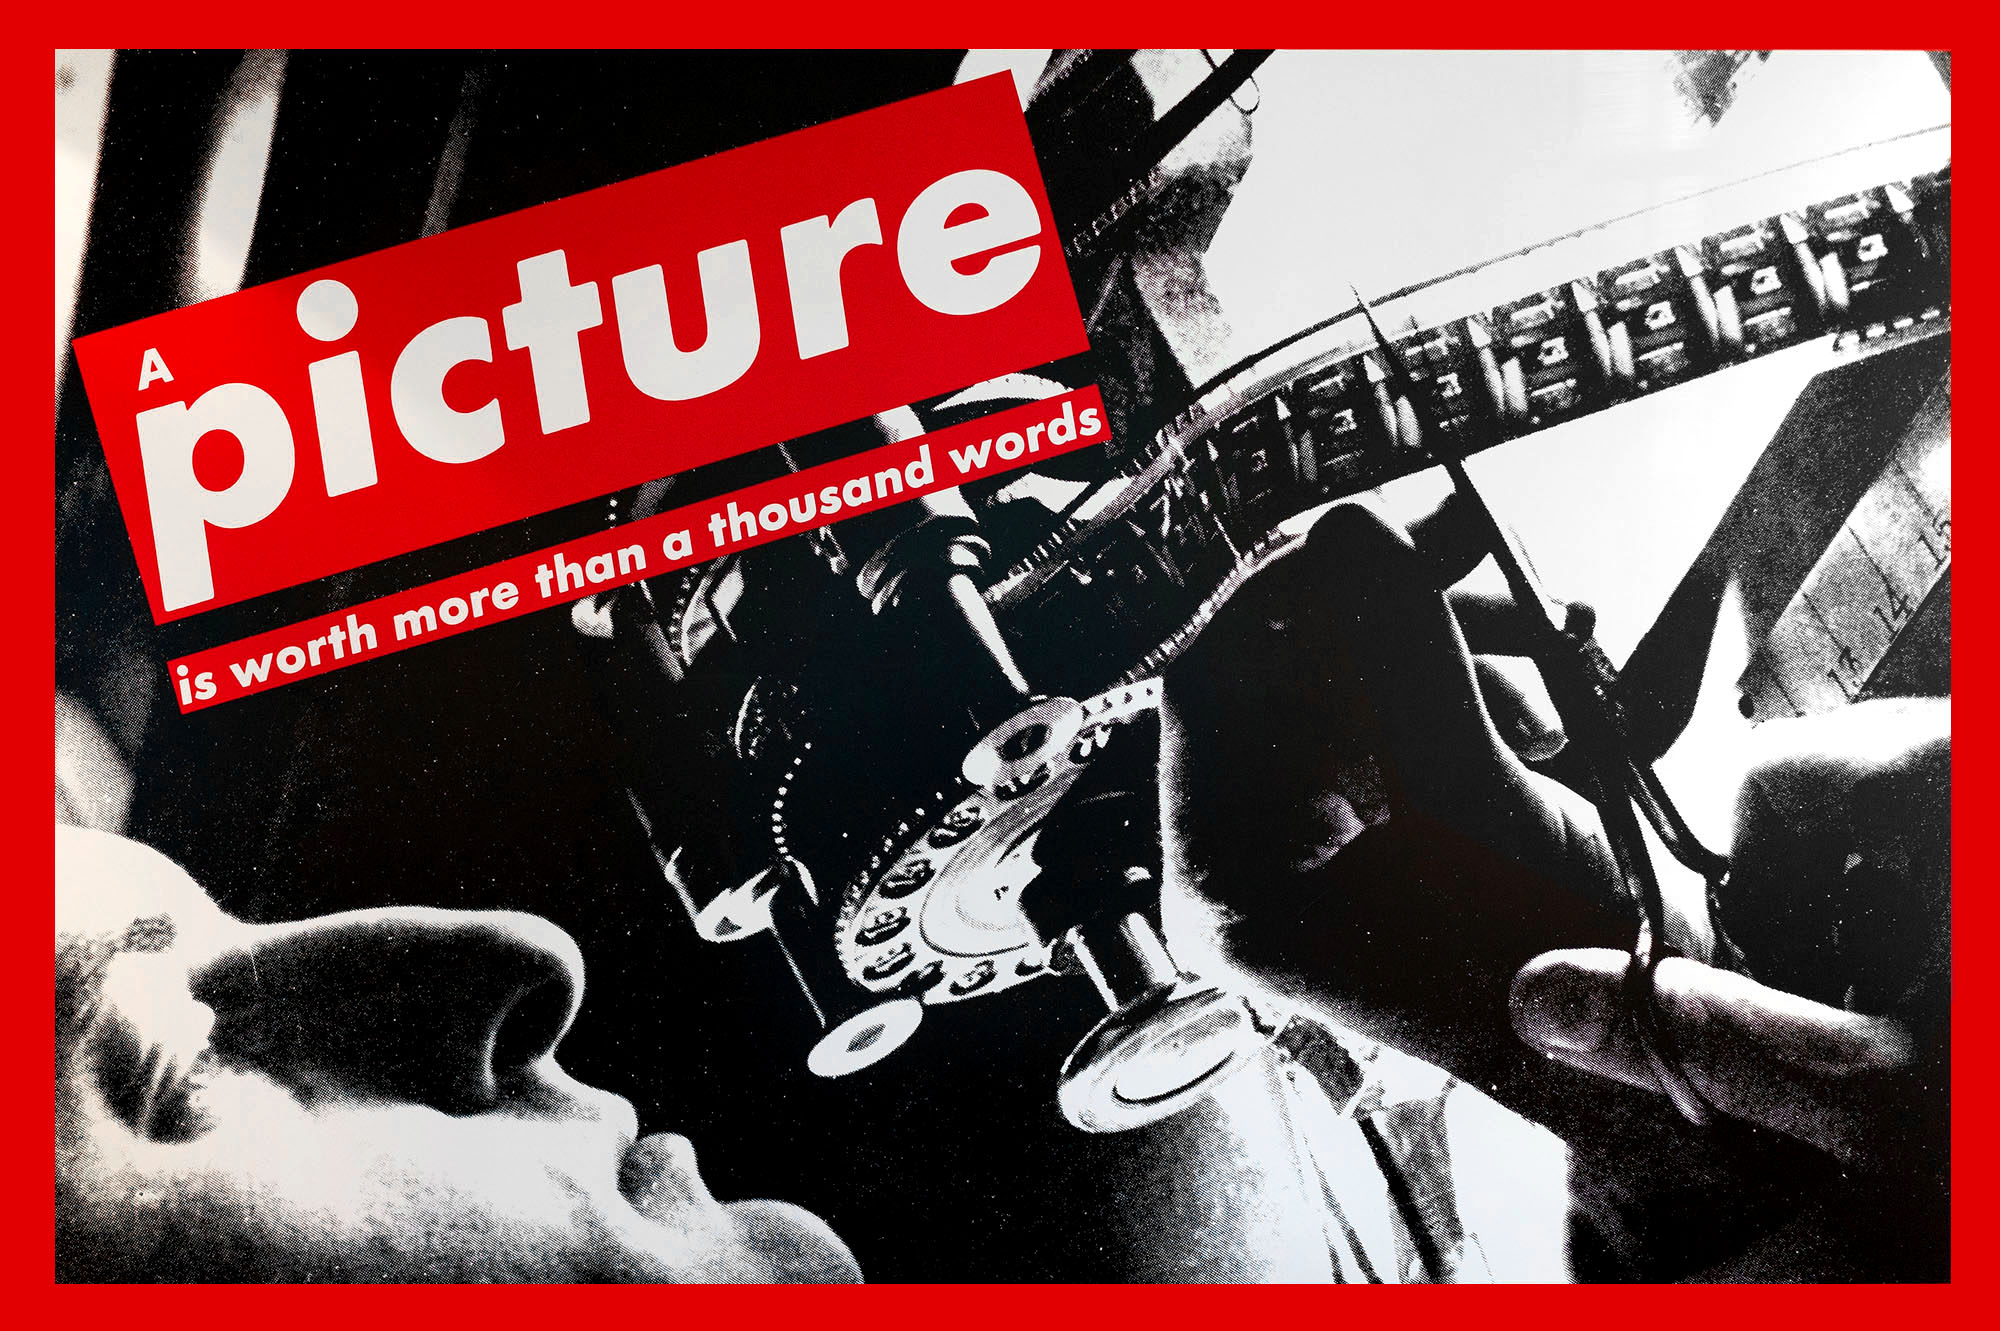 Barbara Kruger - Untitled (A picture is worth more than a thousand words)1992.jpg